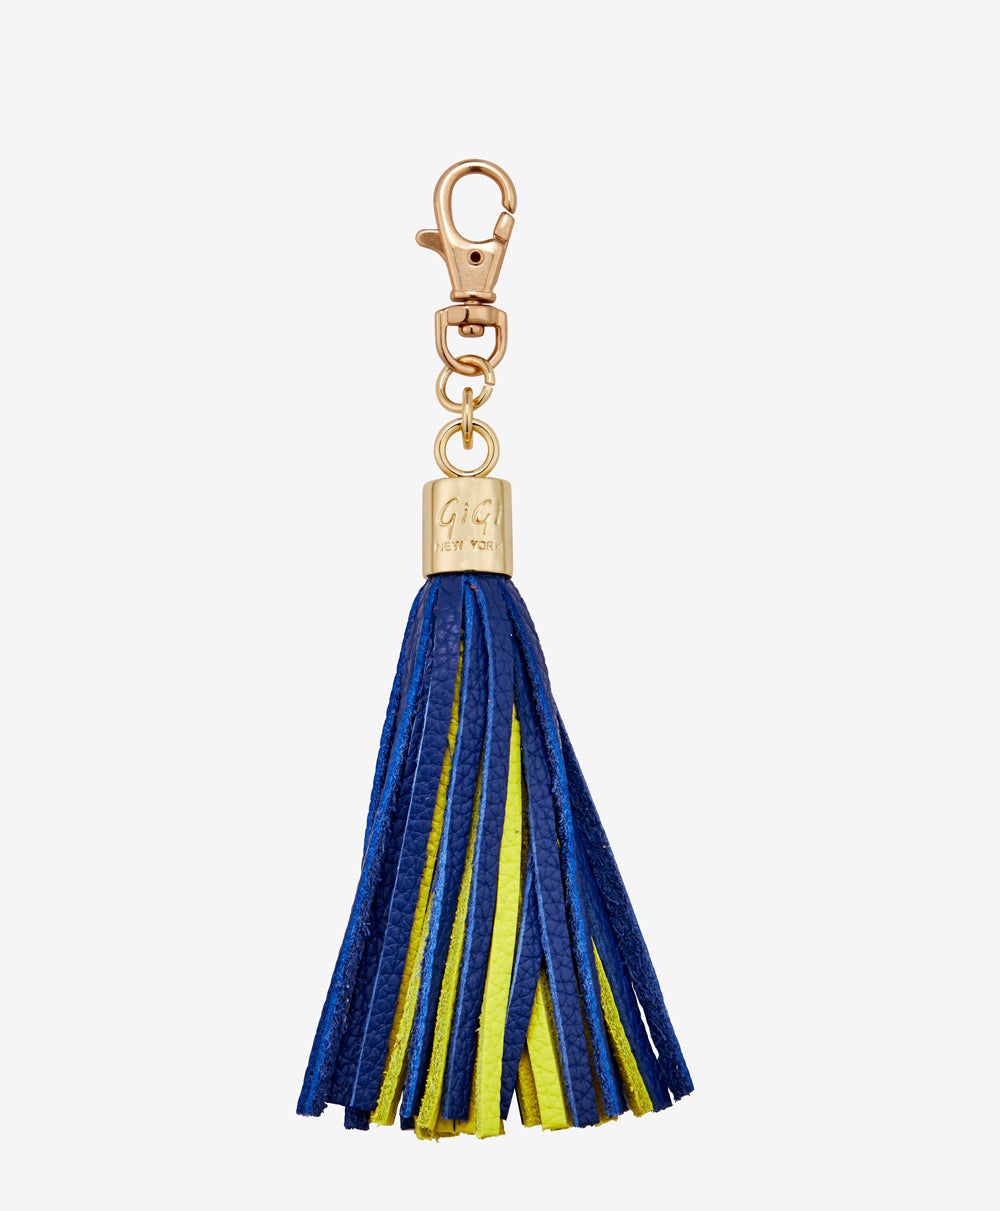 Leather Tassel Key Chain | Navy and Gold Leather